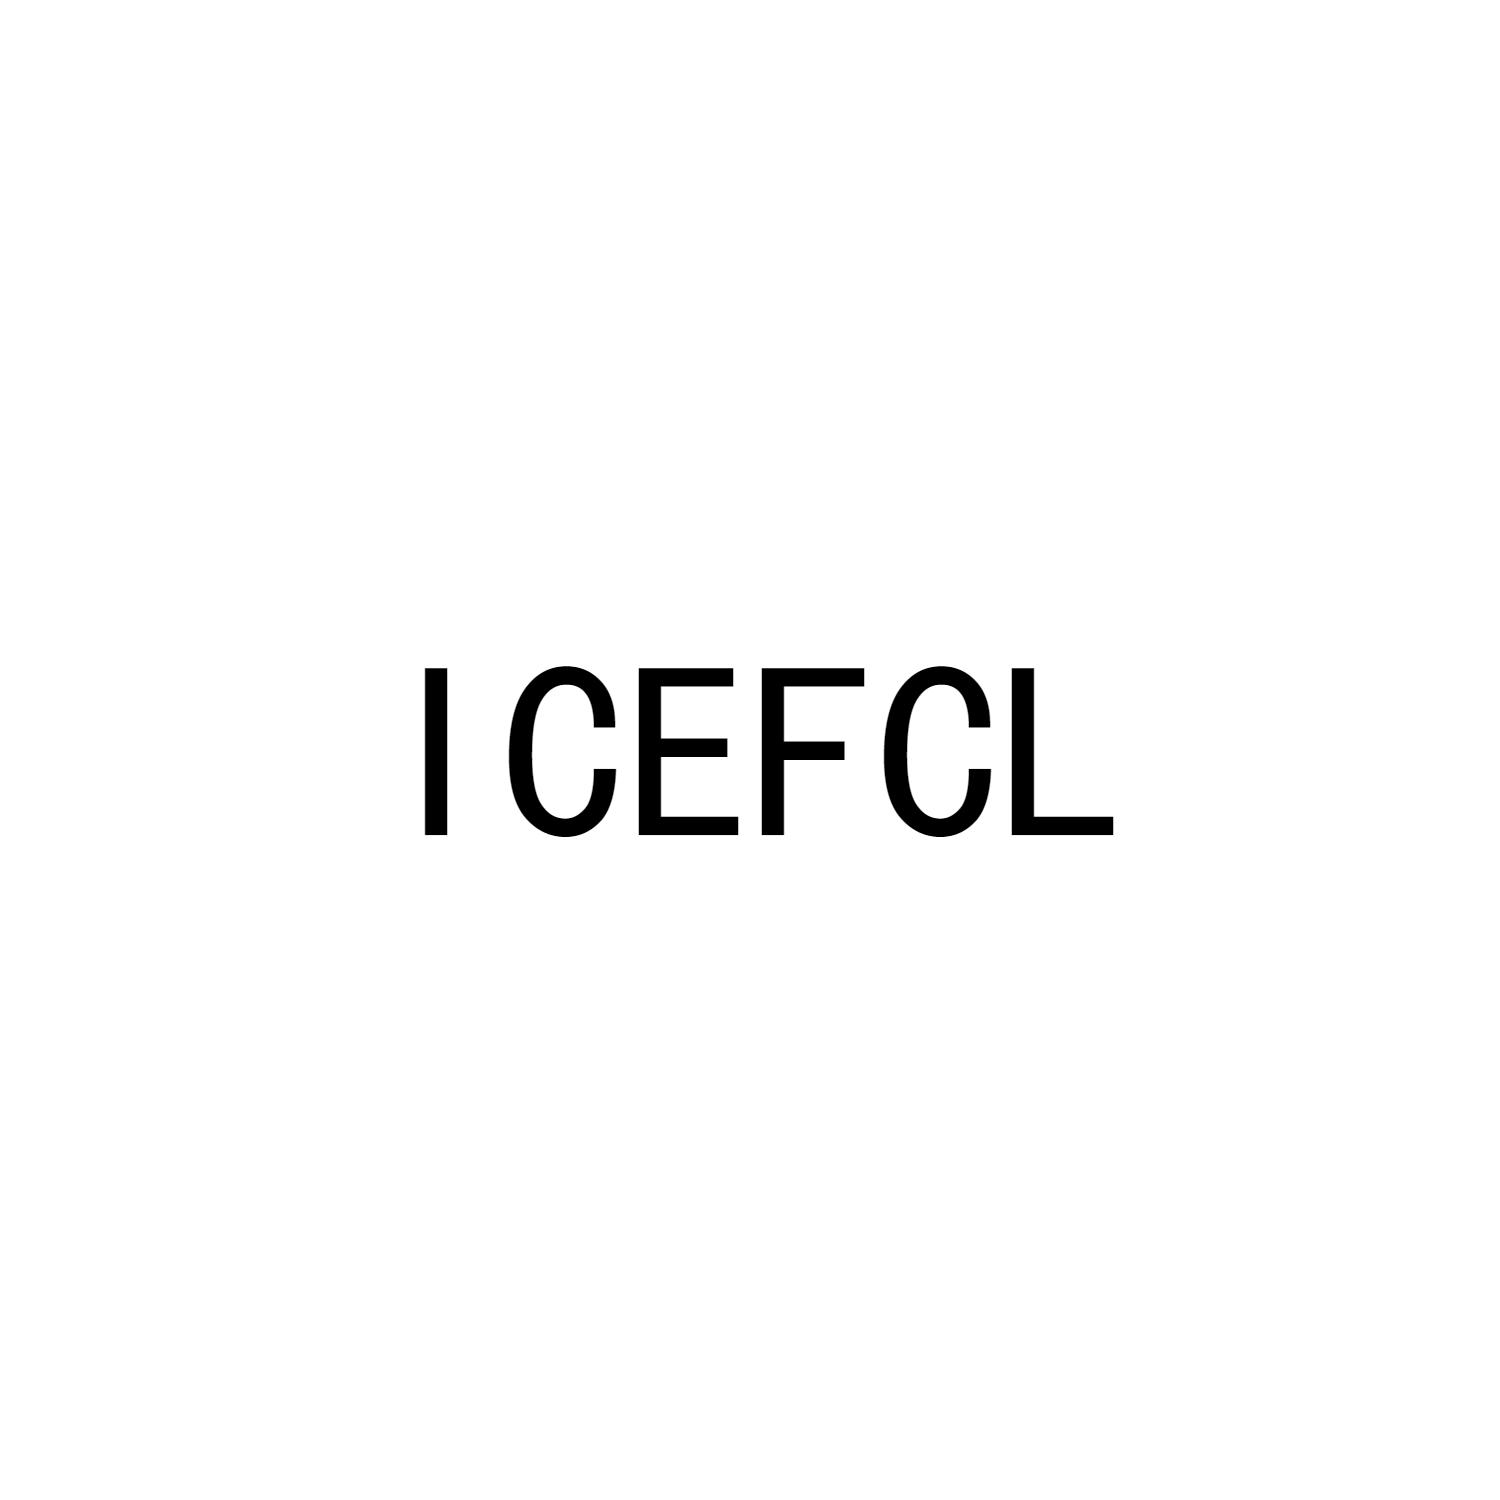 ICEFCL